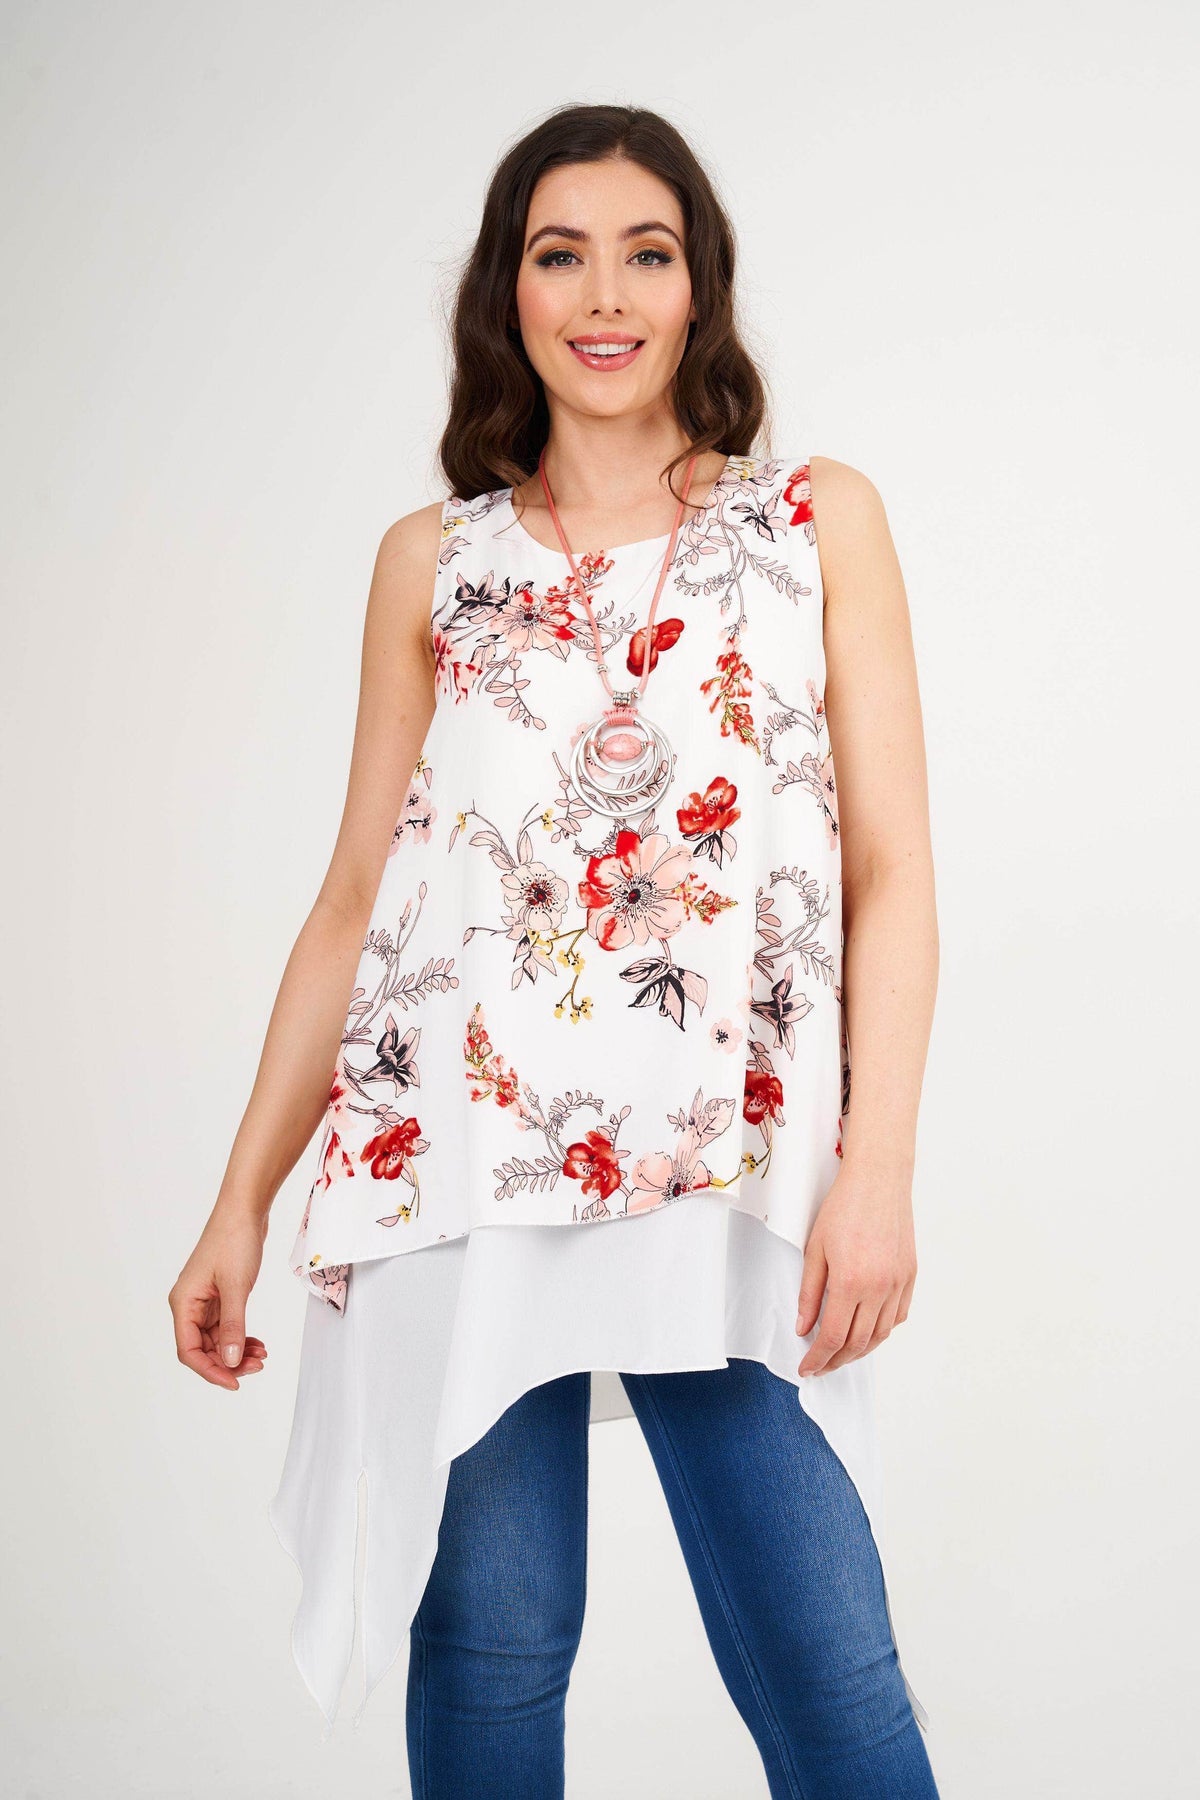 Saloos Tunic Double-Layered Tunic Top with Necklace